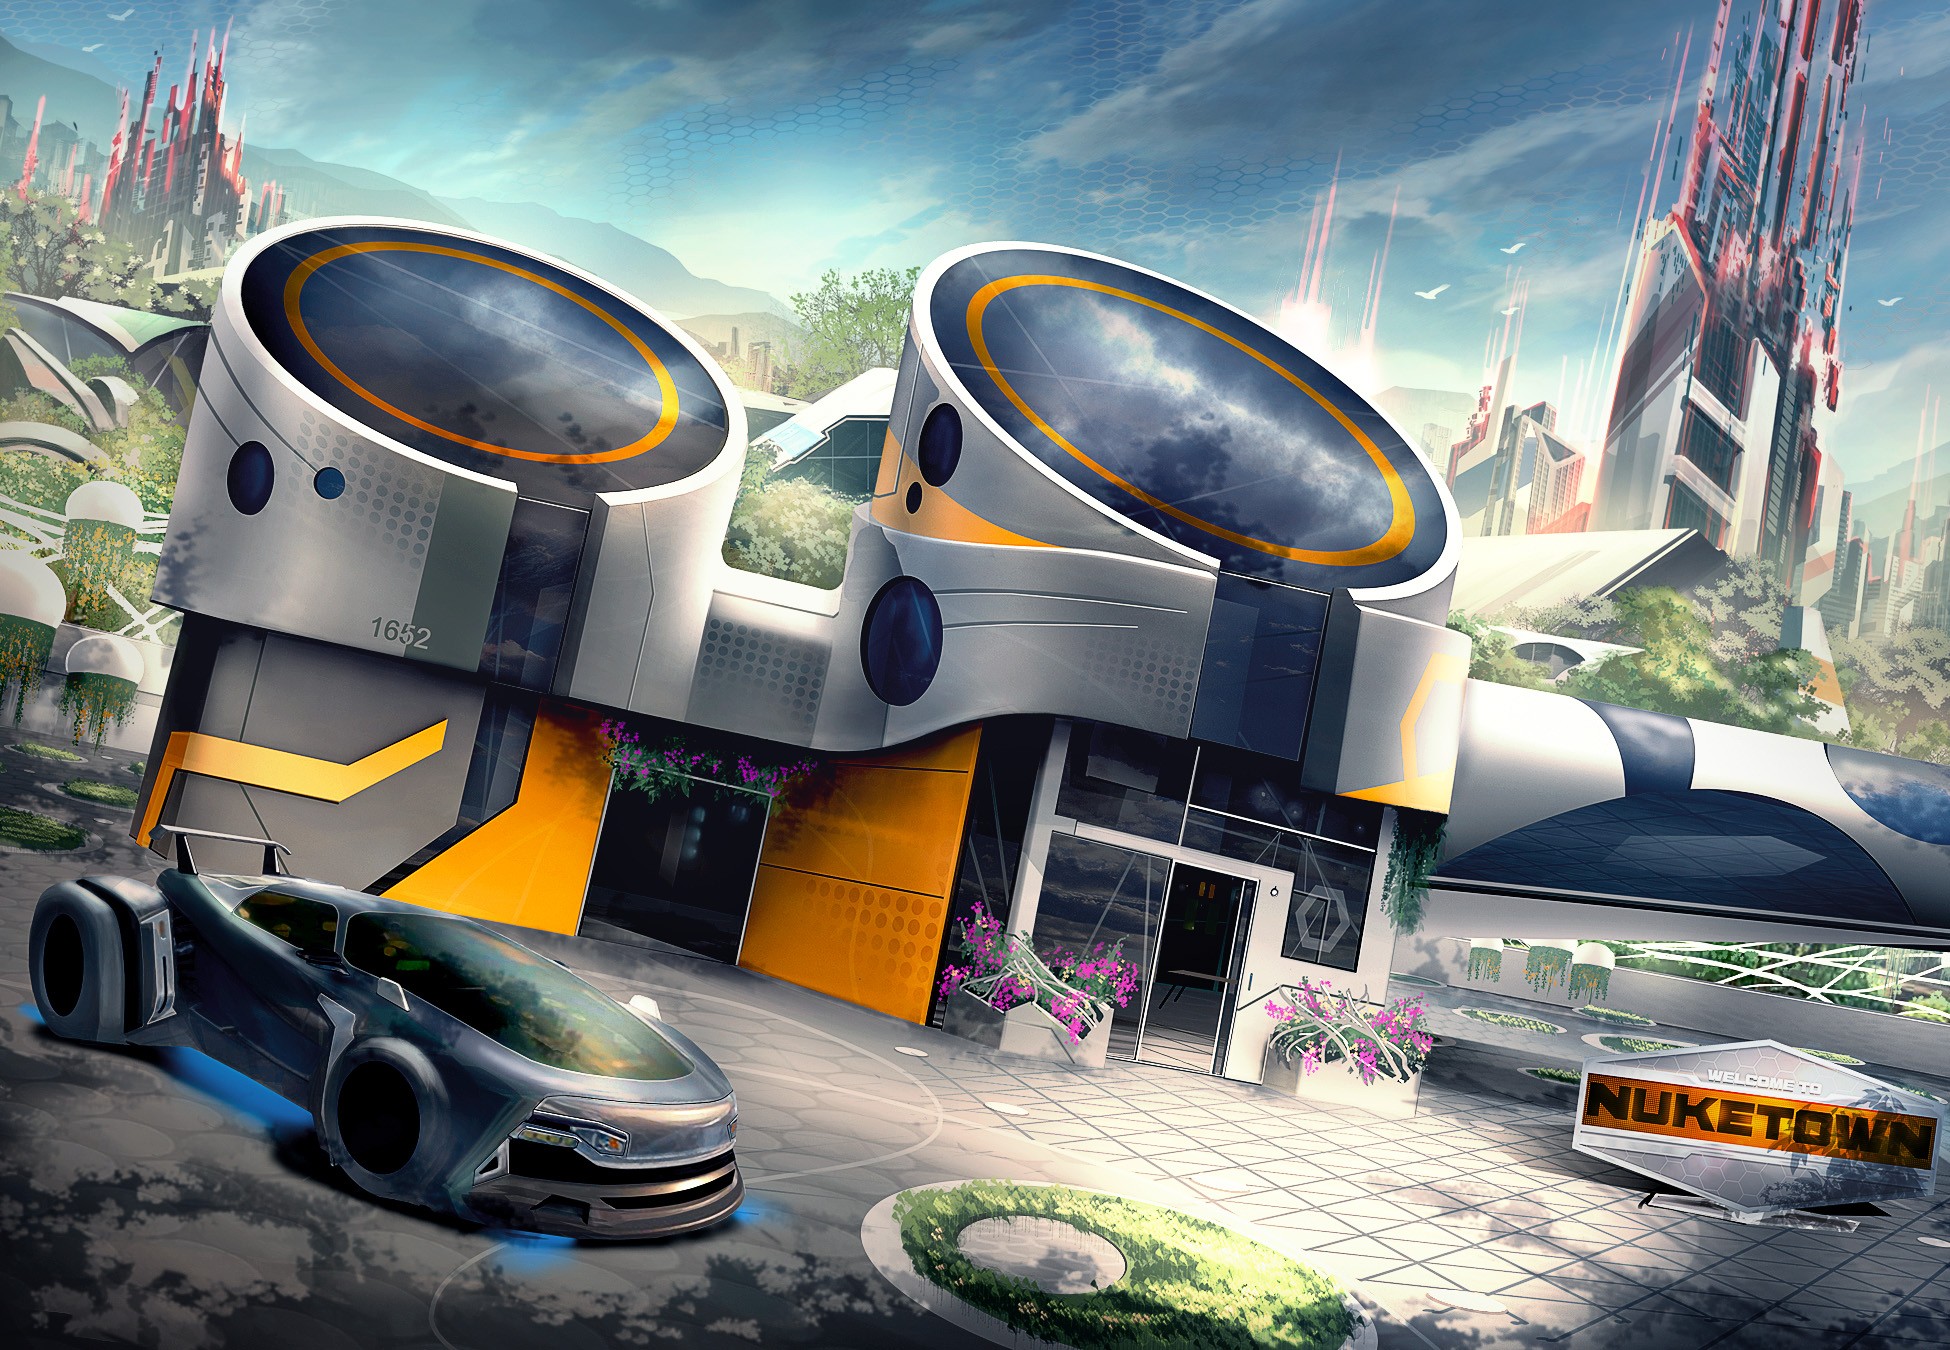 Call Of Duty Black Ops Confirms Nuketown Only Offered For Pre